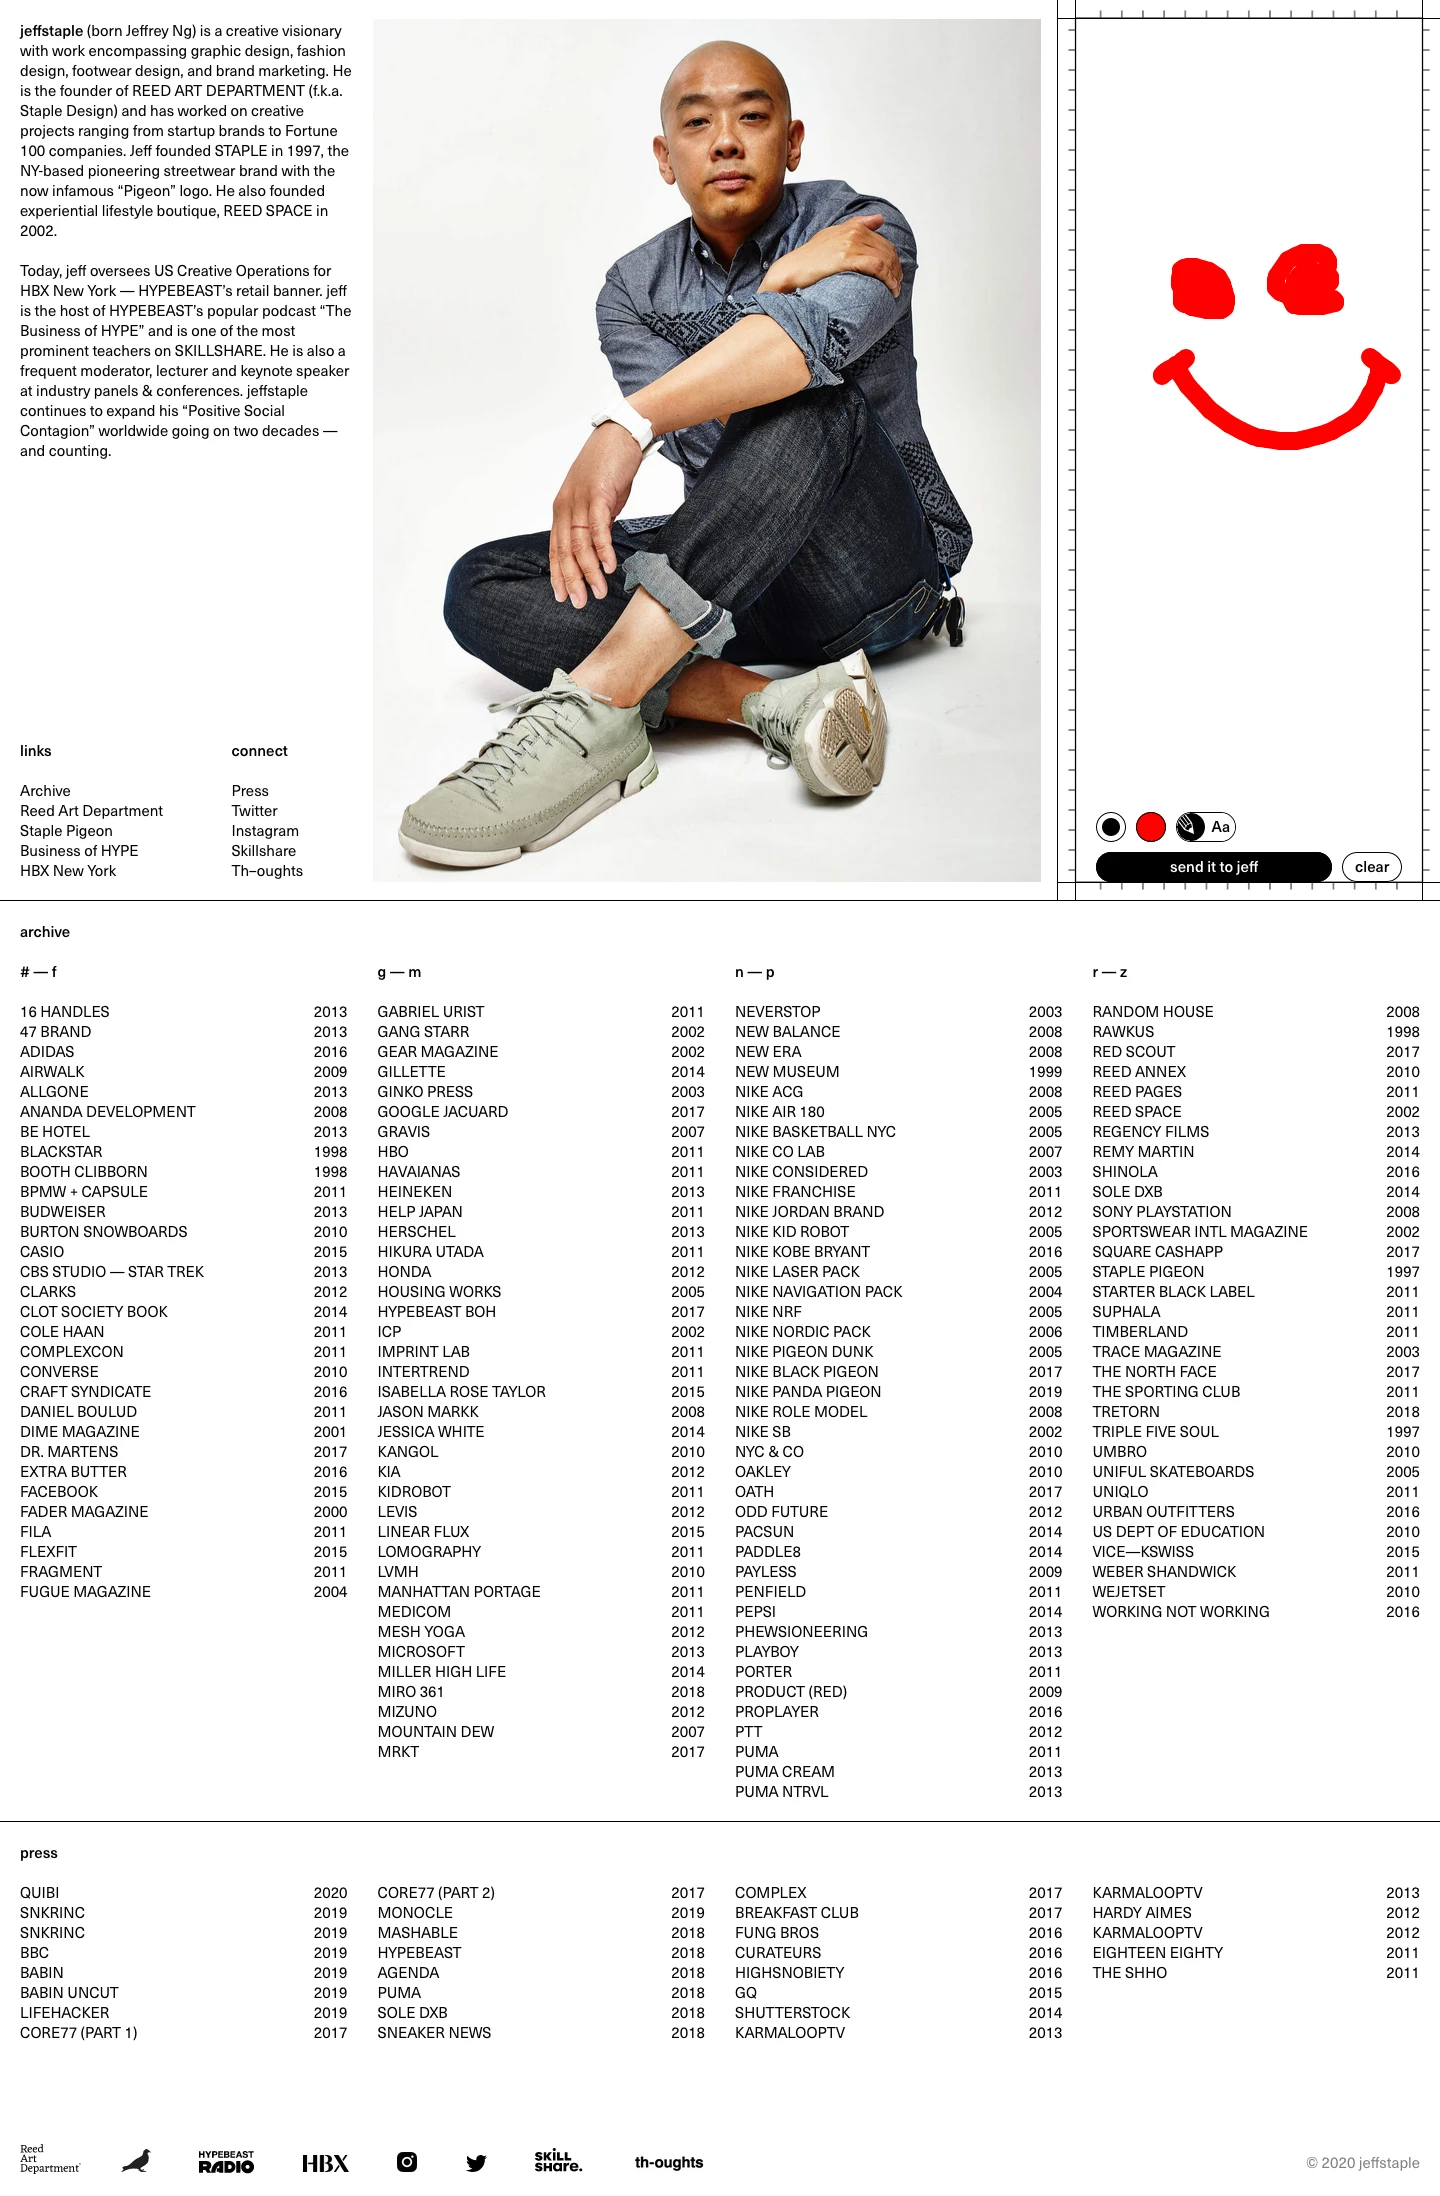 jeffstaple Landing Page Example: jeffstaple (born Jeffrey Ng) is a creative visionary with work encompassing graphic design, fashion design, footwear design, and brand marketing.